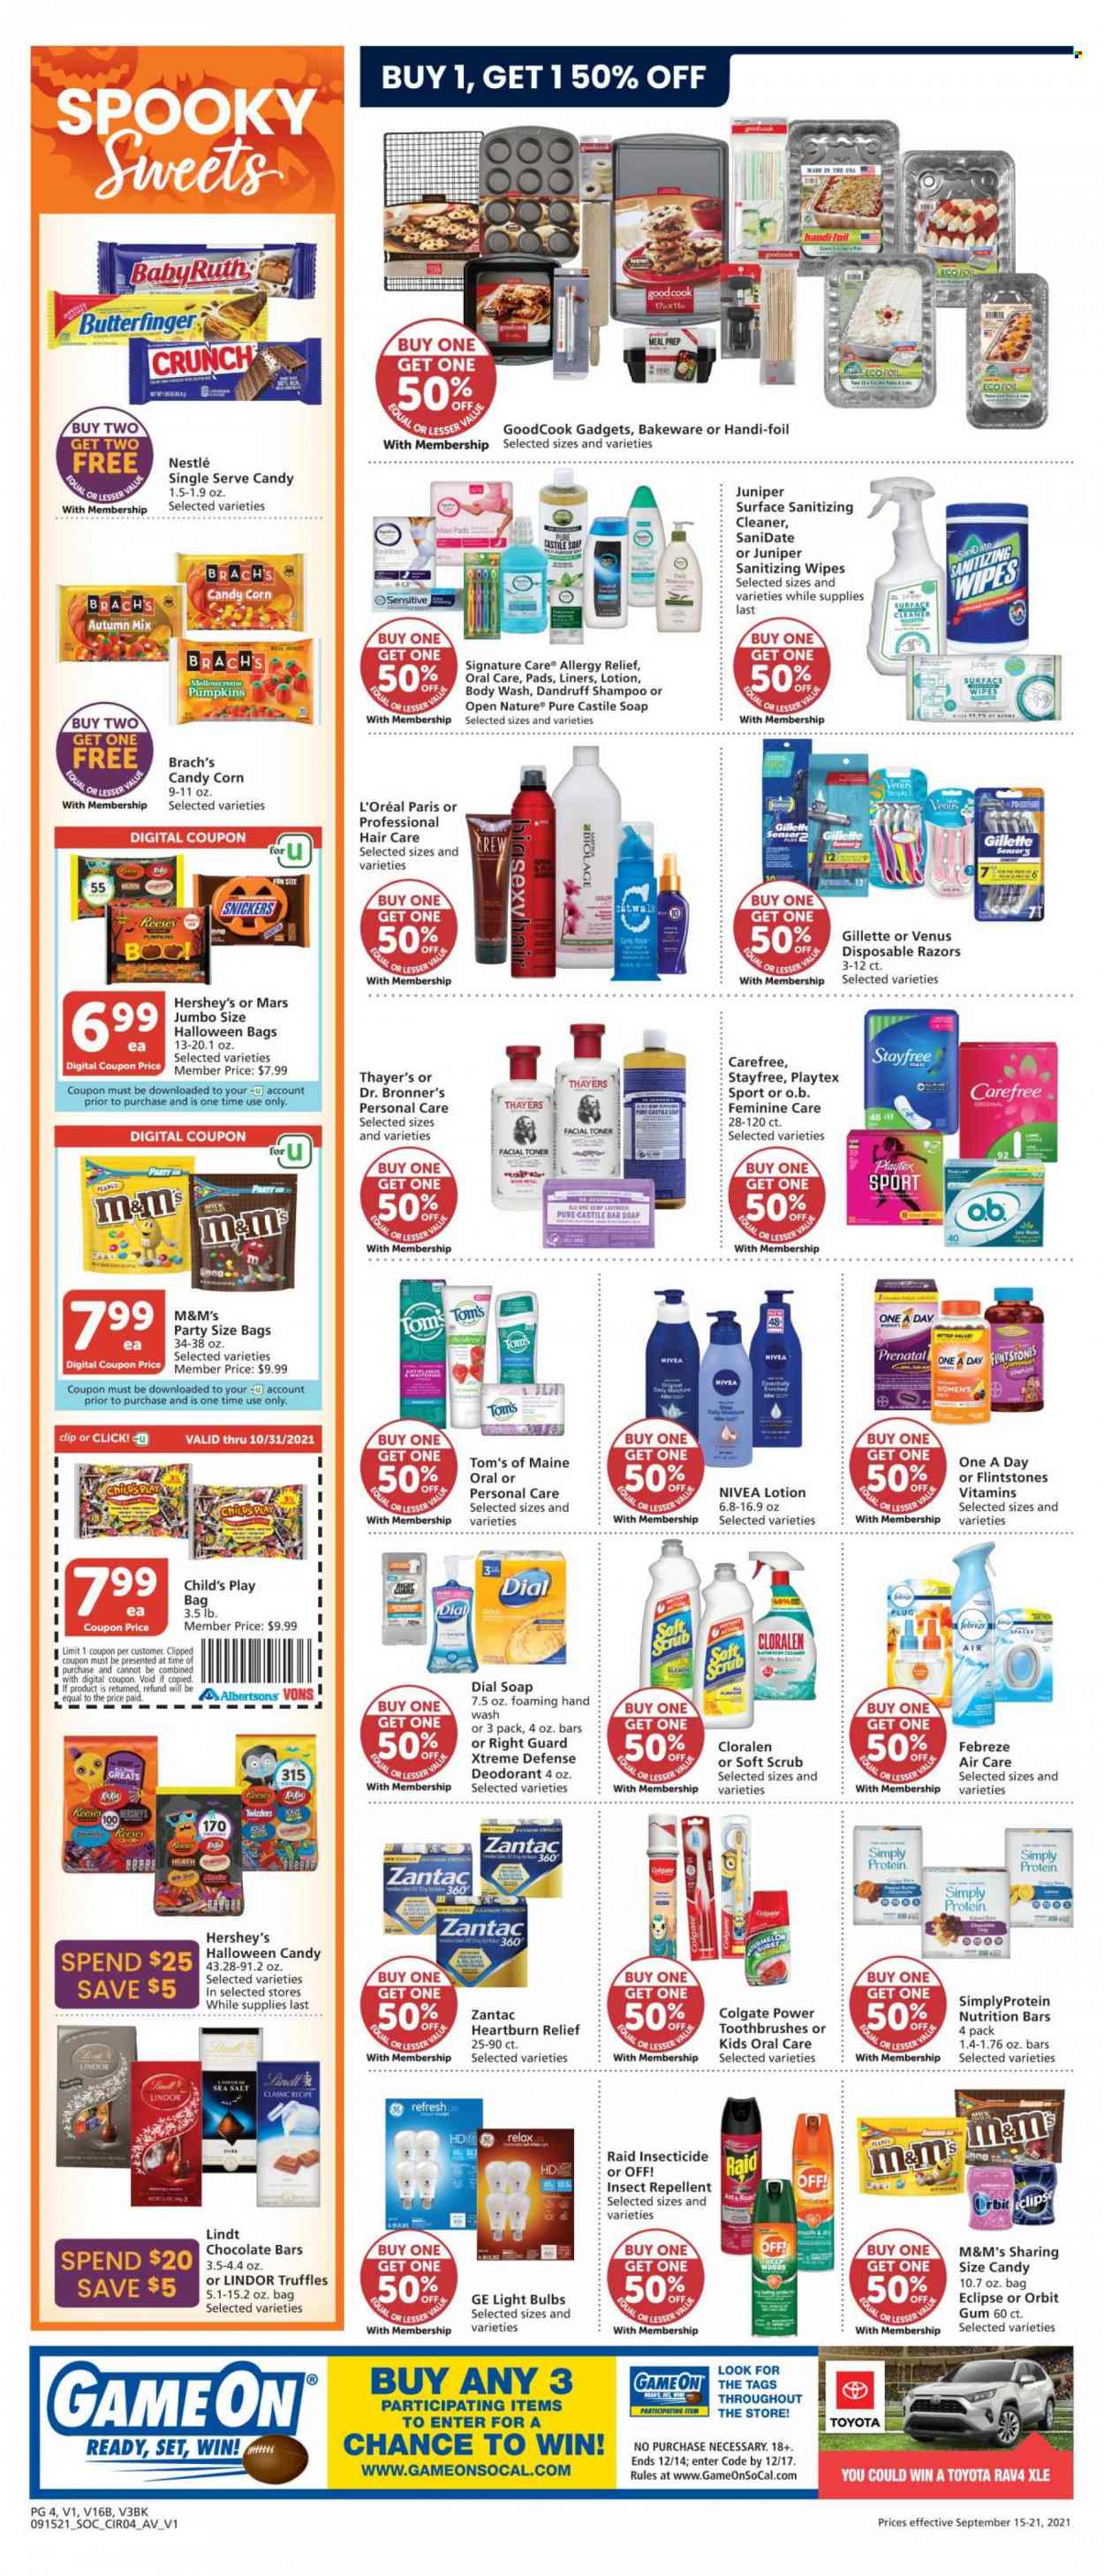 thumbnail - Vons Flyer - 09/15/2021 - 09/21/2021 - Sales products - corn, Reese's, Hershey's, Nestlé, Orbit, Lindt, Lindor, Mars, truffles, M&M's, chocolate bar, sea salt, nutrition bar, wipes, Febreze, surface cleaner, cleaner, bleach, antiseptic wipes, body wash, shampoo, hand wash, soap bar, Dial, soap, Colgate, Stayfree, Playtex, Carefree, L’Oréal, Nivea, body lotion, anti-perspirant, deodorant, Gillette, Venus, disposable razor, bakeware, bulb, light bulb, Zantac, Prenatal, allergy relief. Page 4.